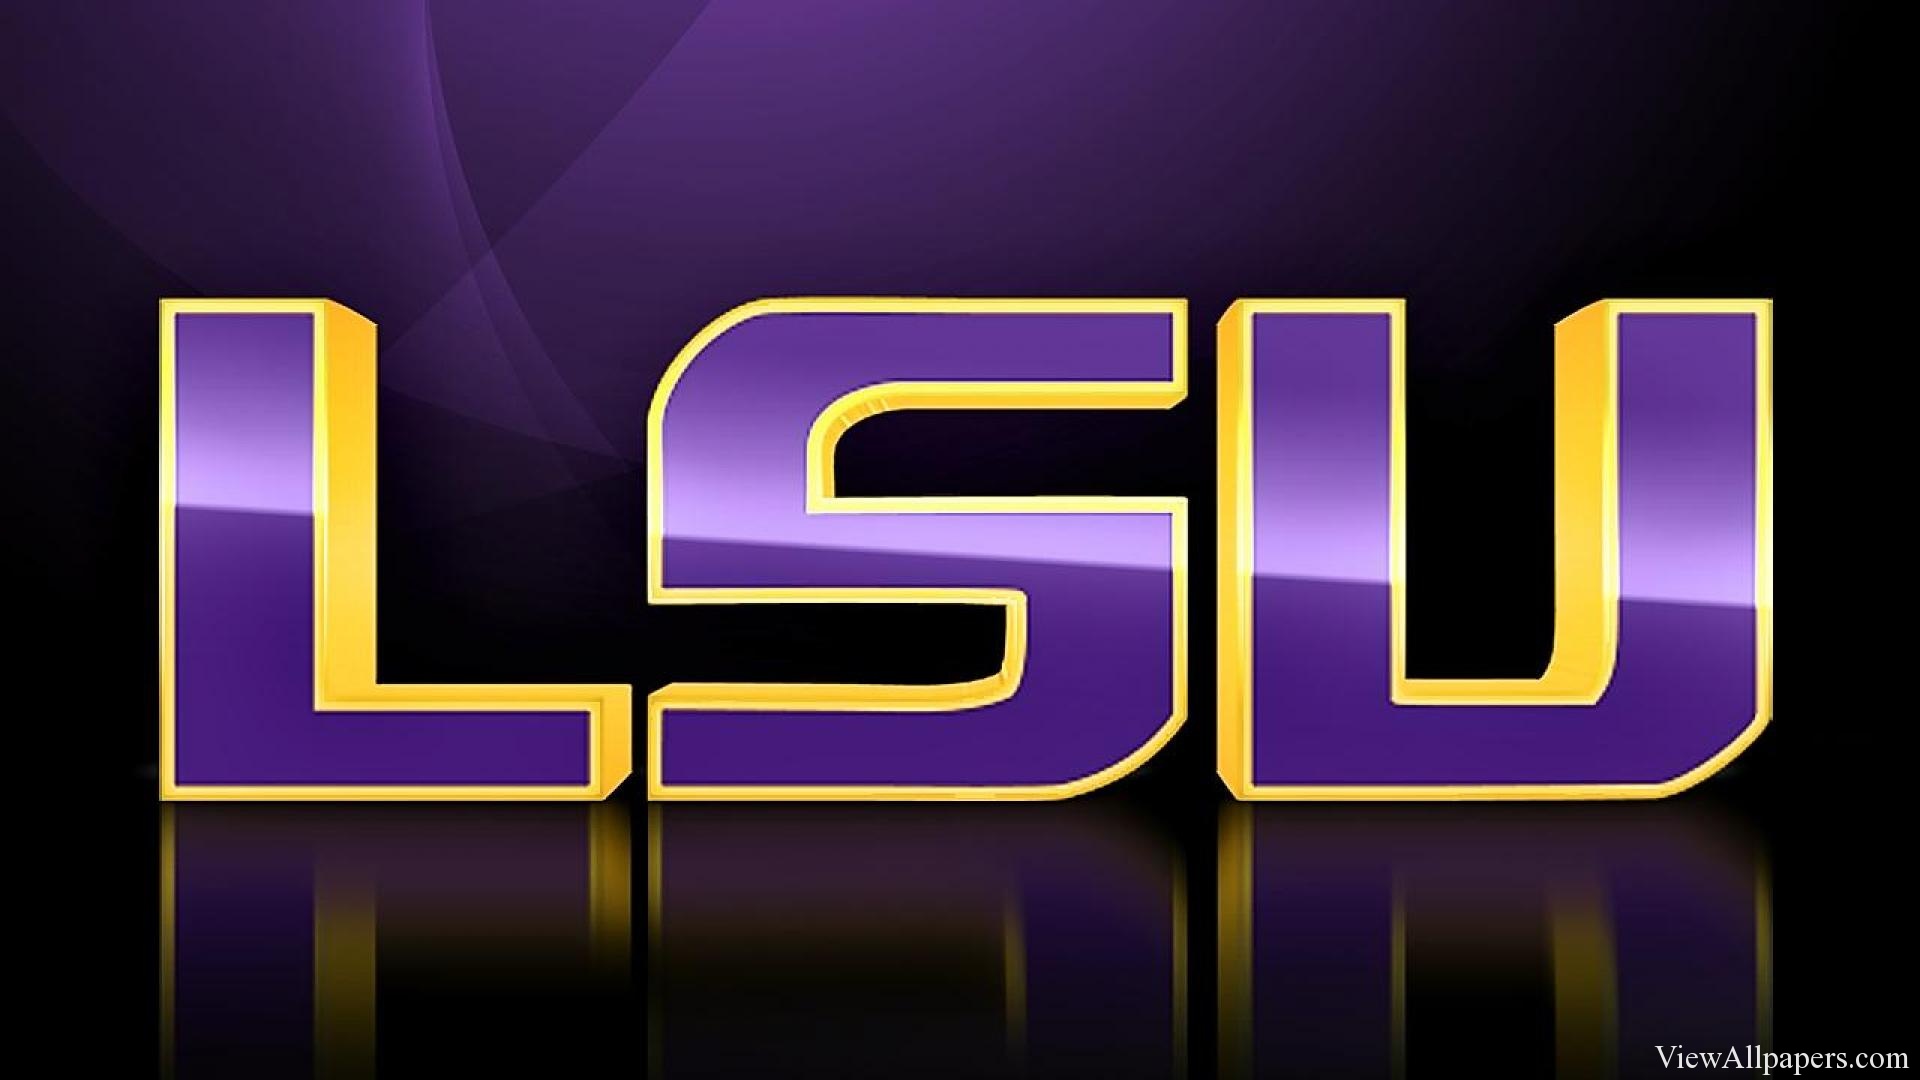 Lsu Tigers Football For Pc Puters Desktop Background